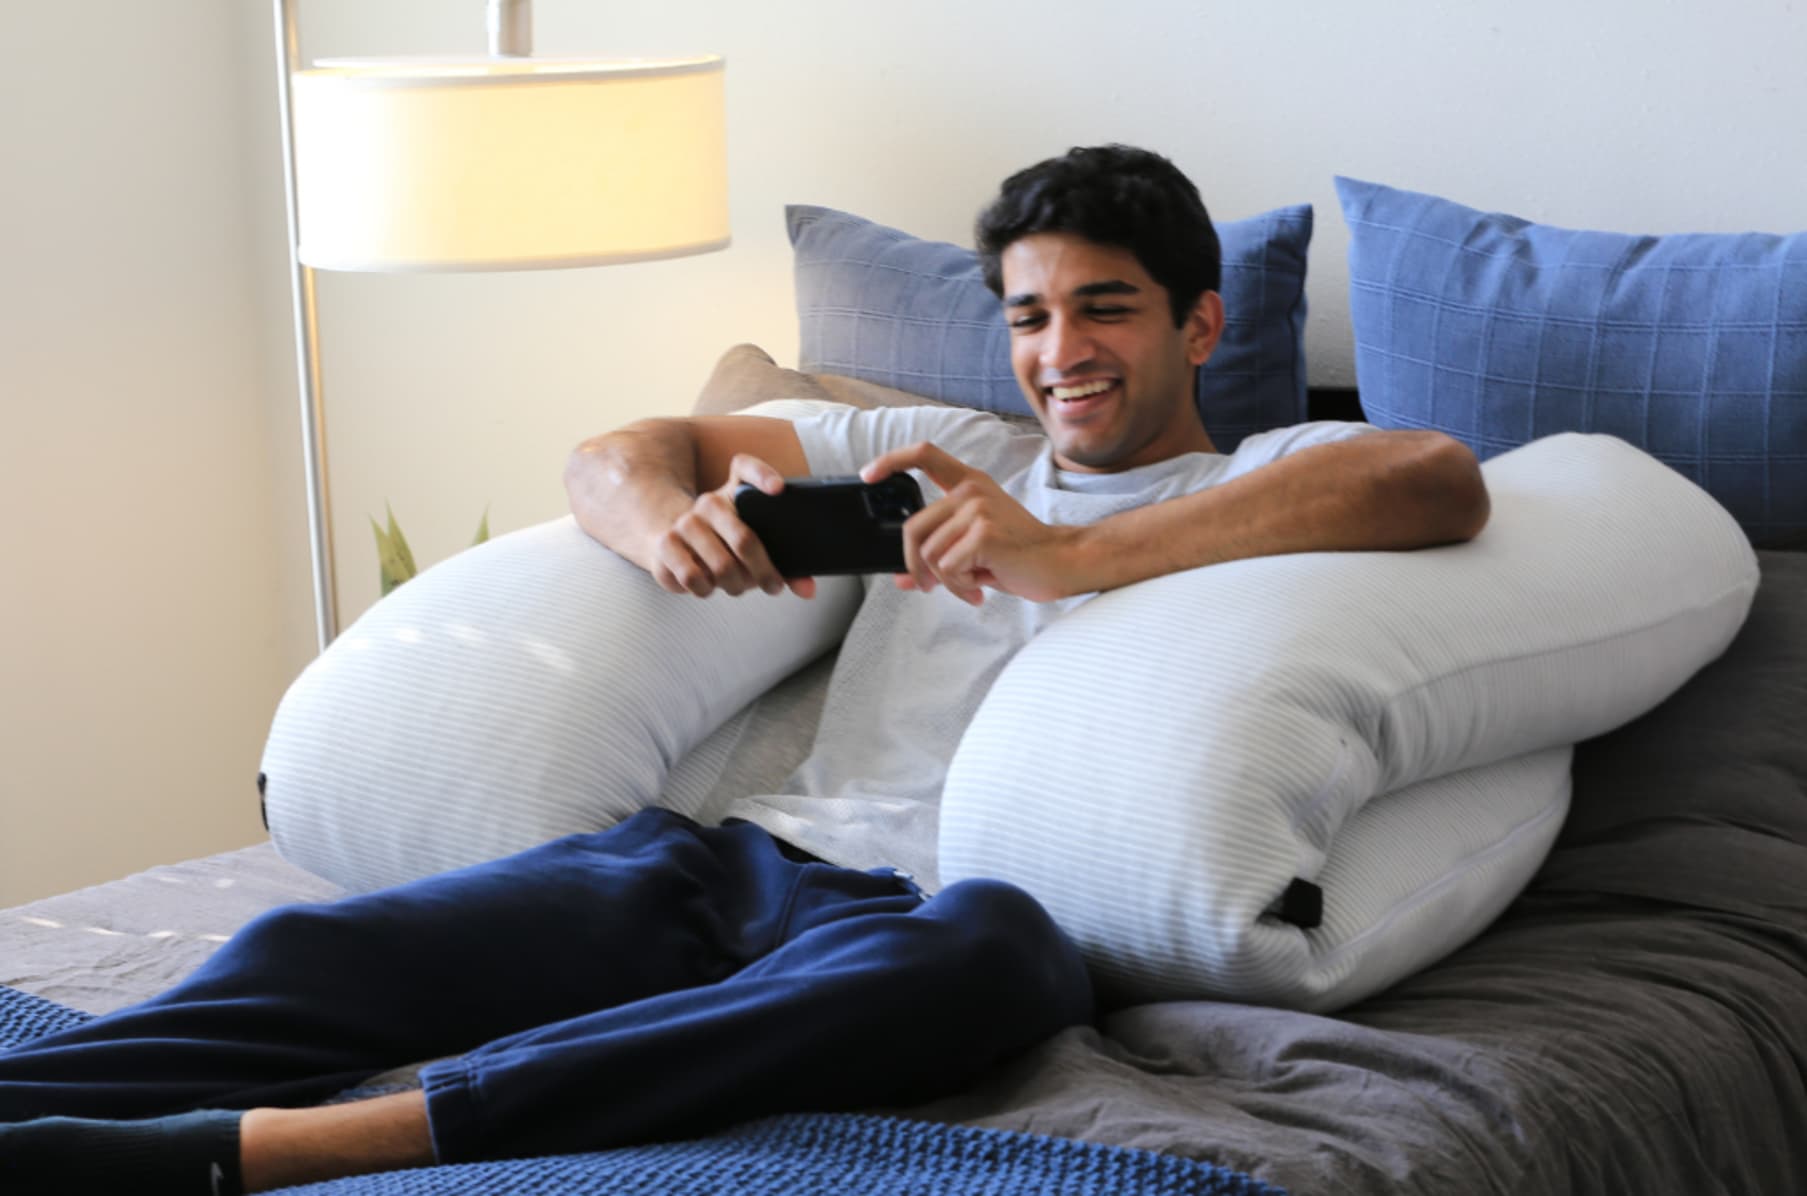 Hugl: The Giant, Cooling and Sleep-Inducing Body Pillow by Plufl —  Kickstarter